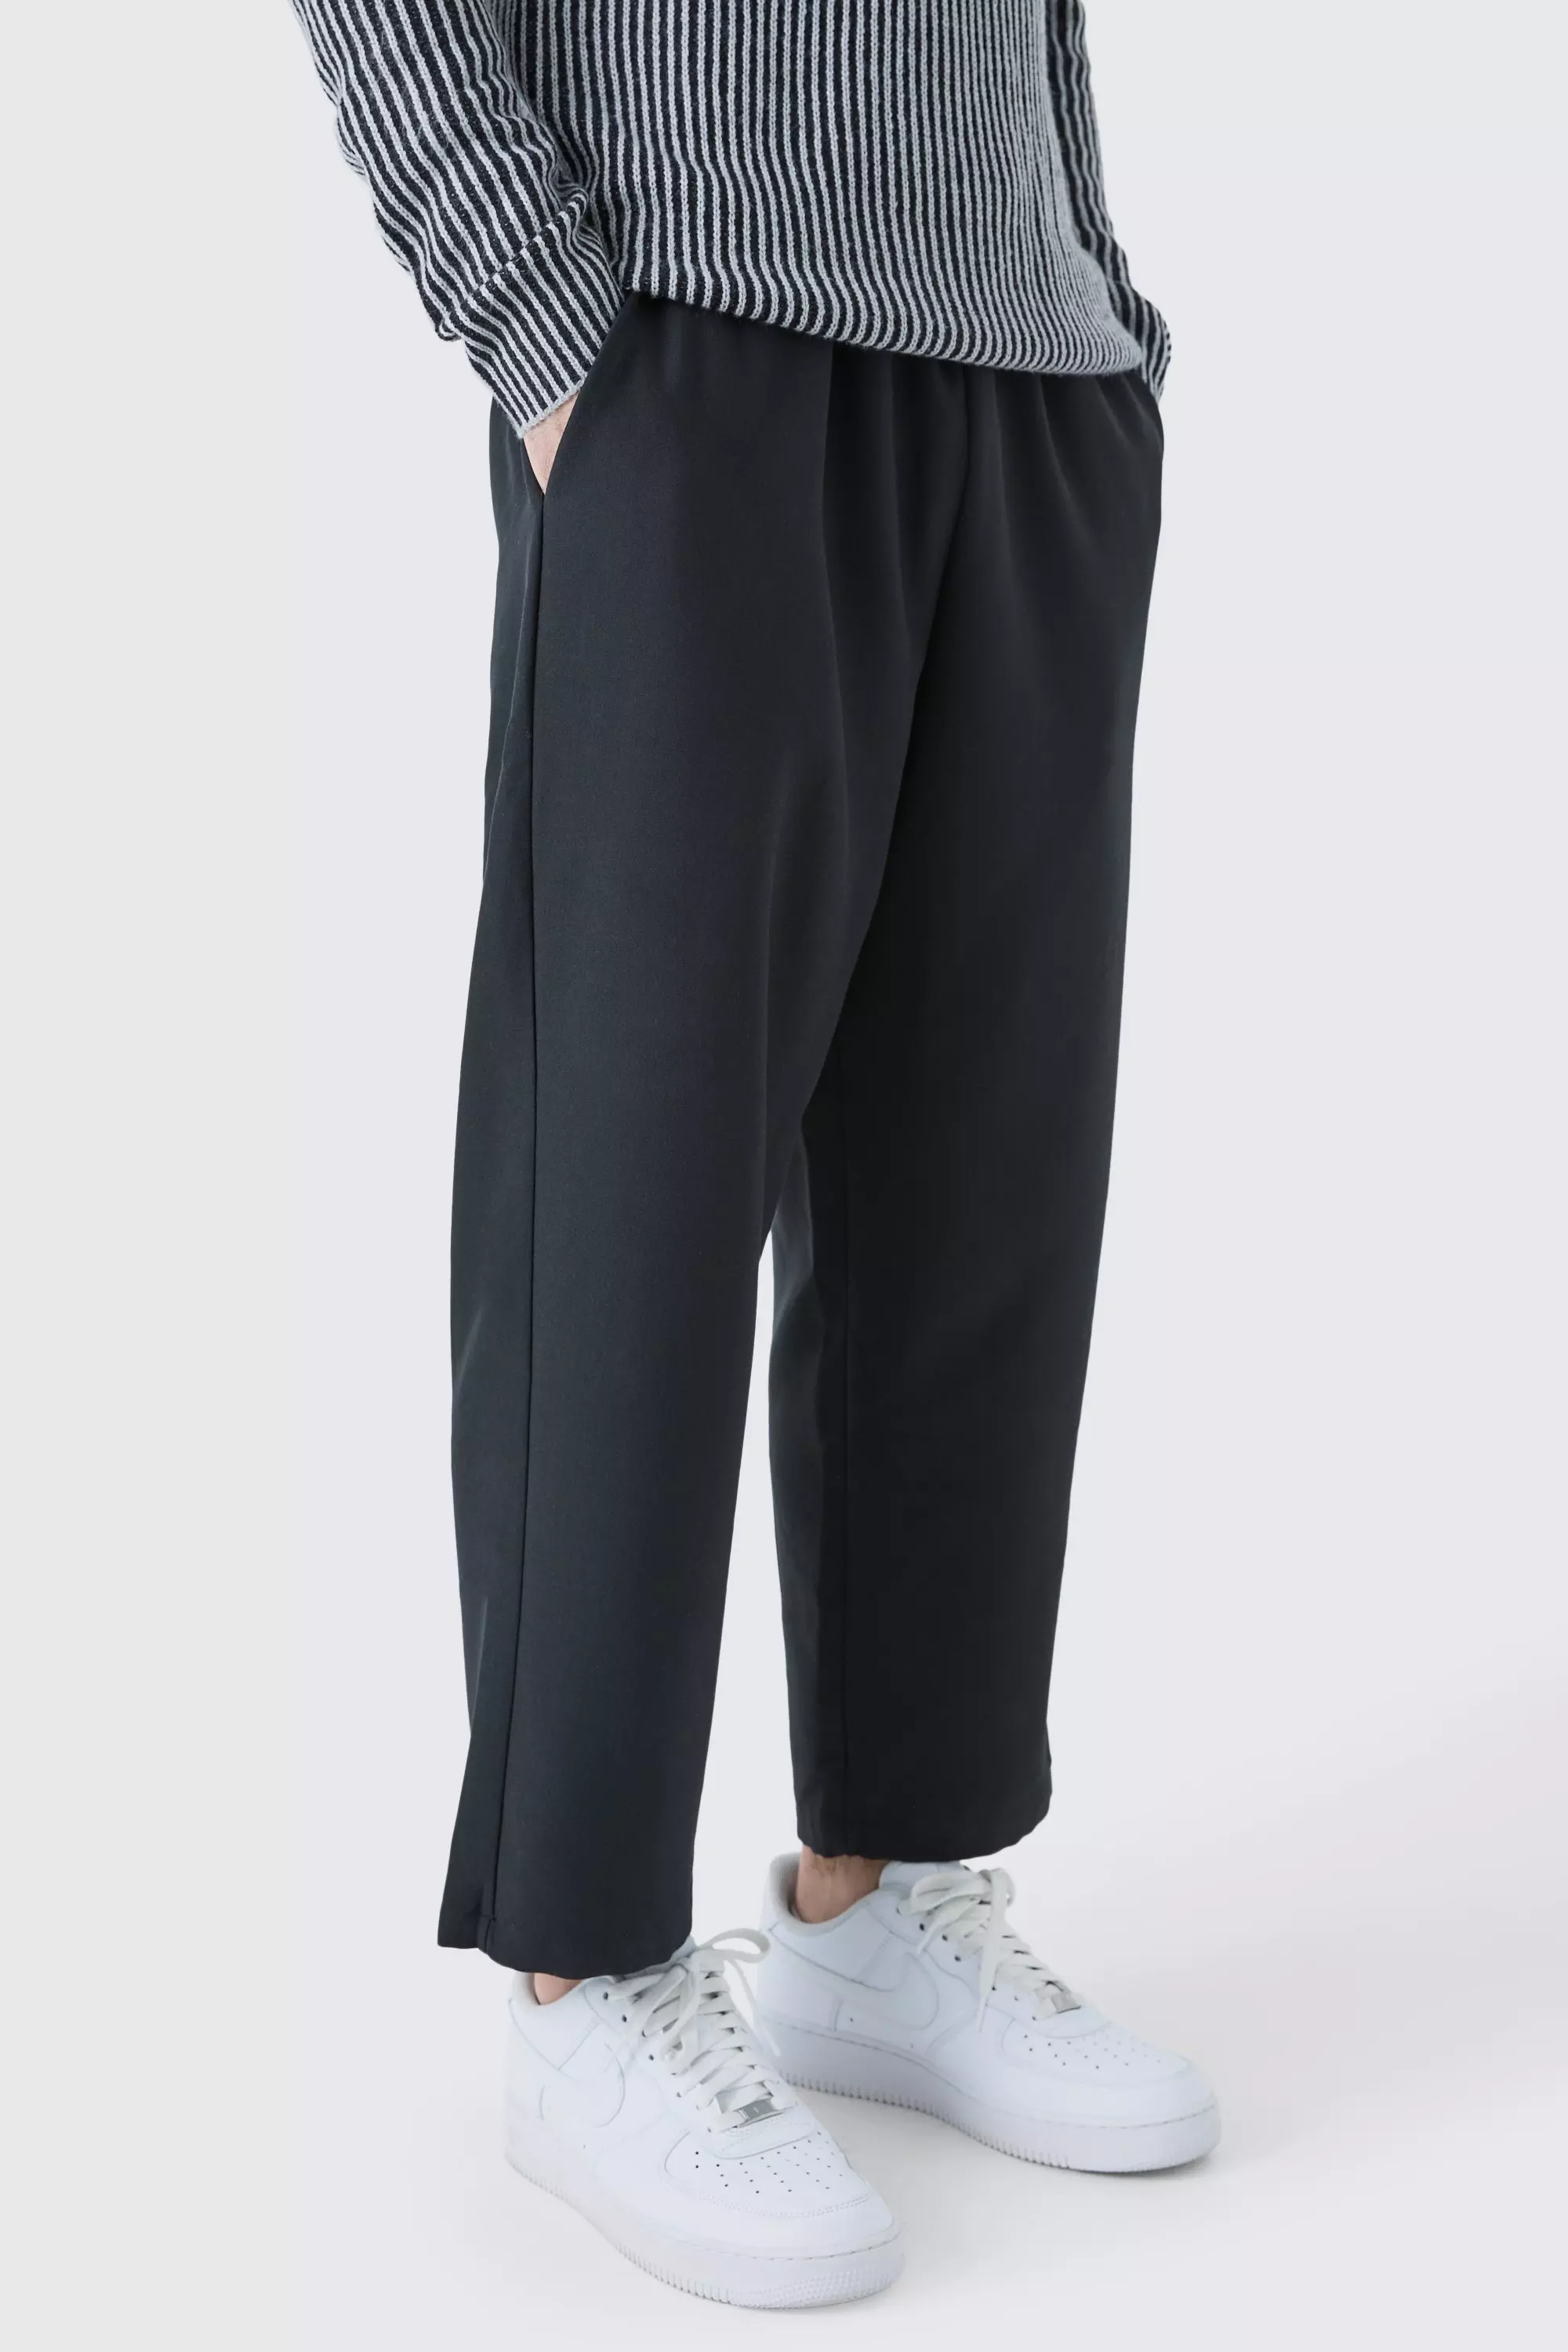 Black Drawcord Waist Cropped Trousers